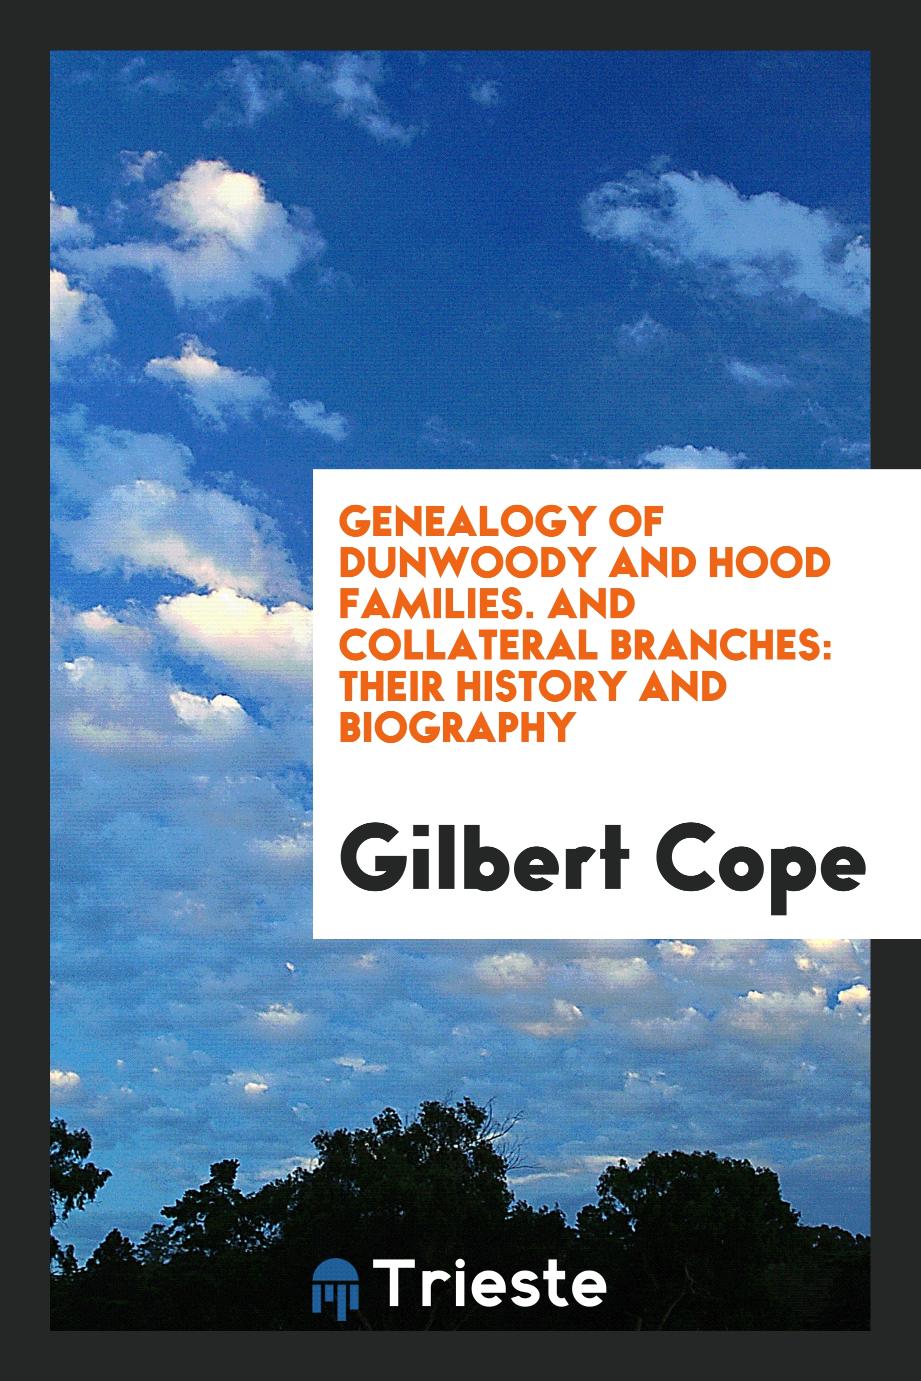 Genealogy of Dunwoody and Hood Families. And Collateral Branches: Their History and Biography